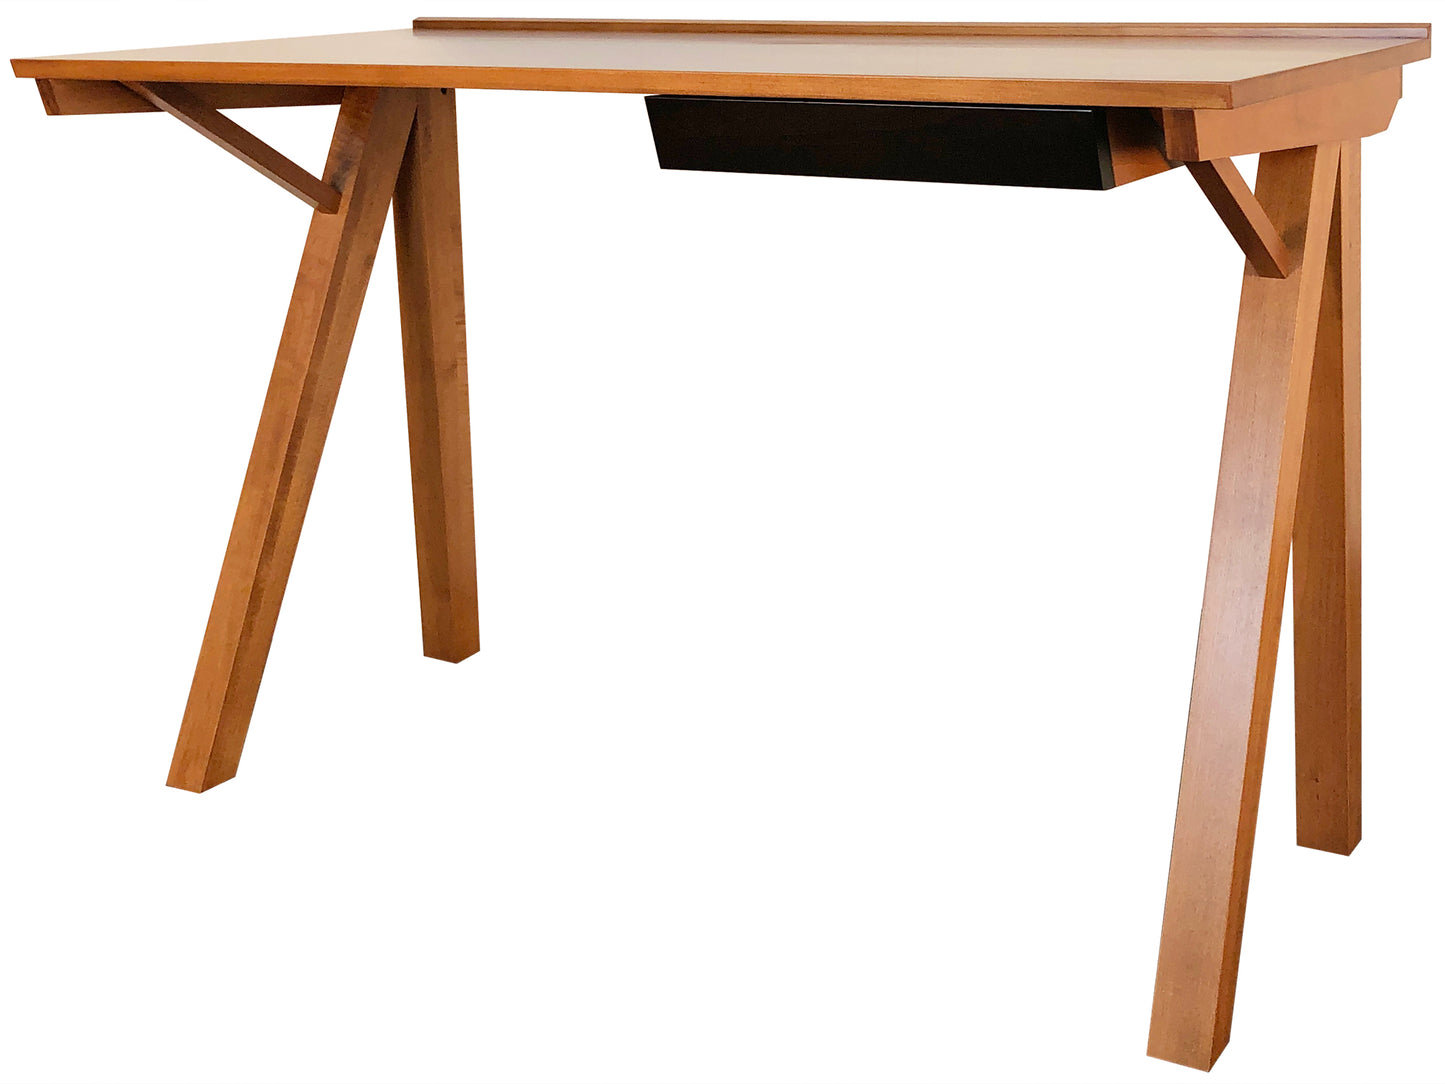 Muse Barcelona Desk, solid wood and built to order in BC this is an in-house design